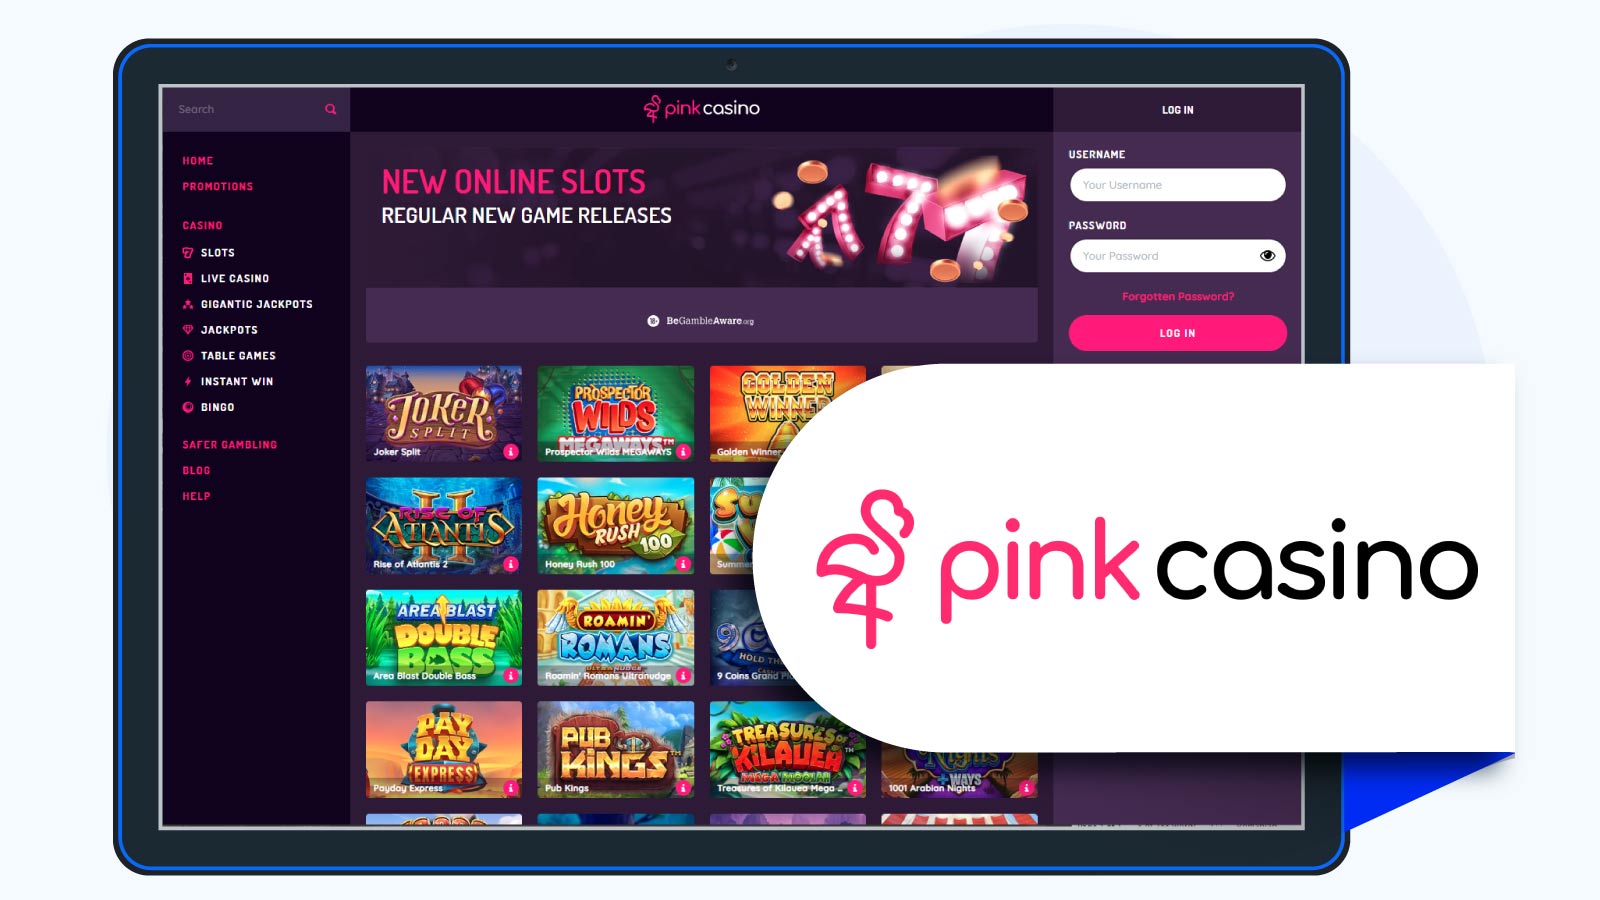 Pink Casino – Trending PayPal Casino for Ongoing Promotions